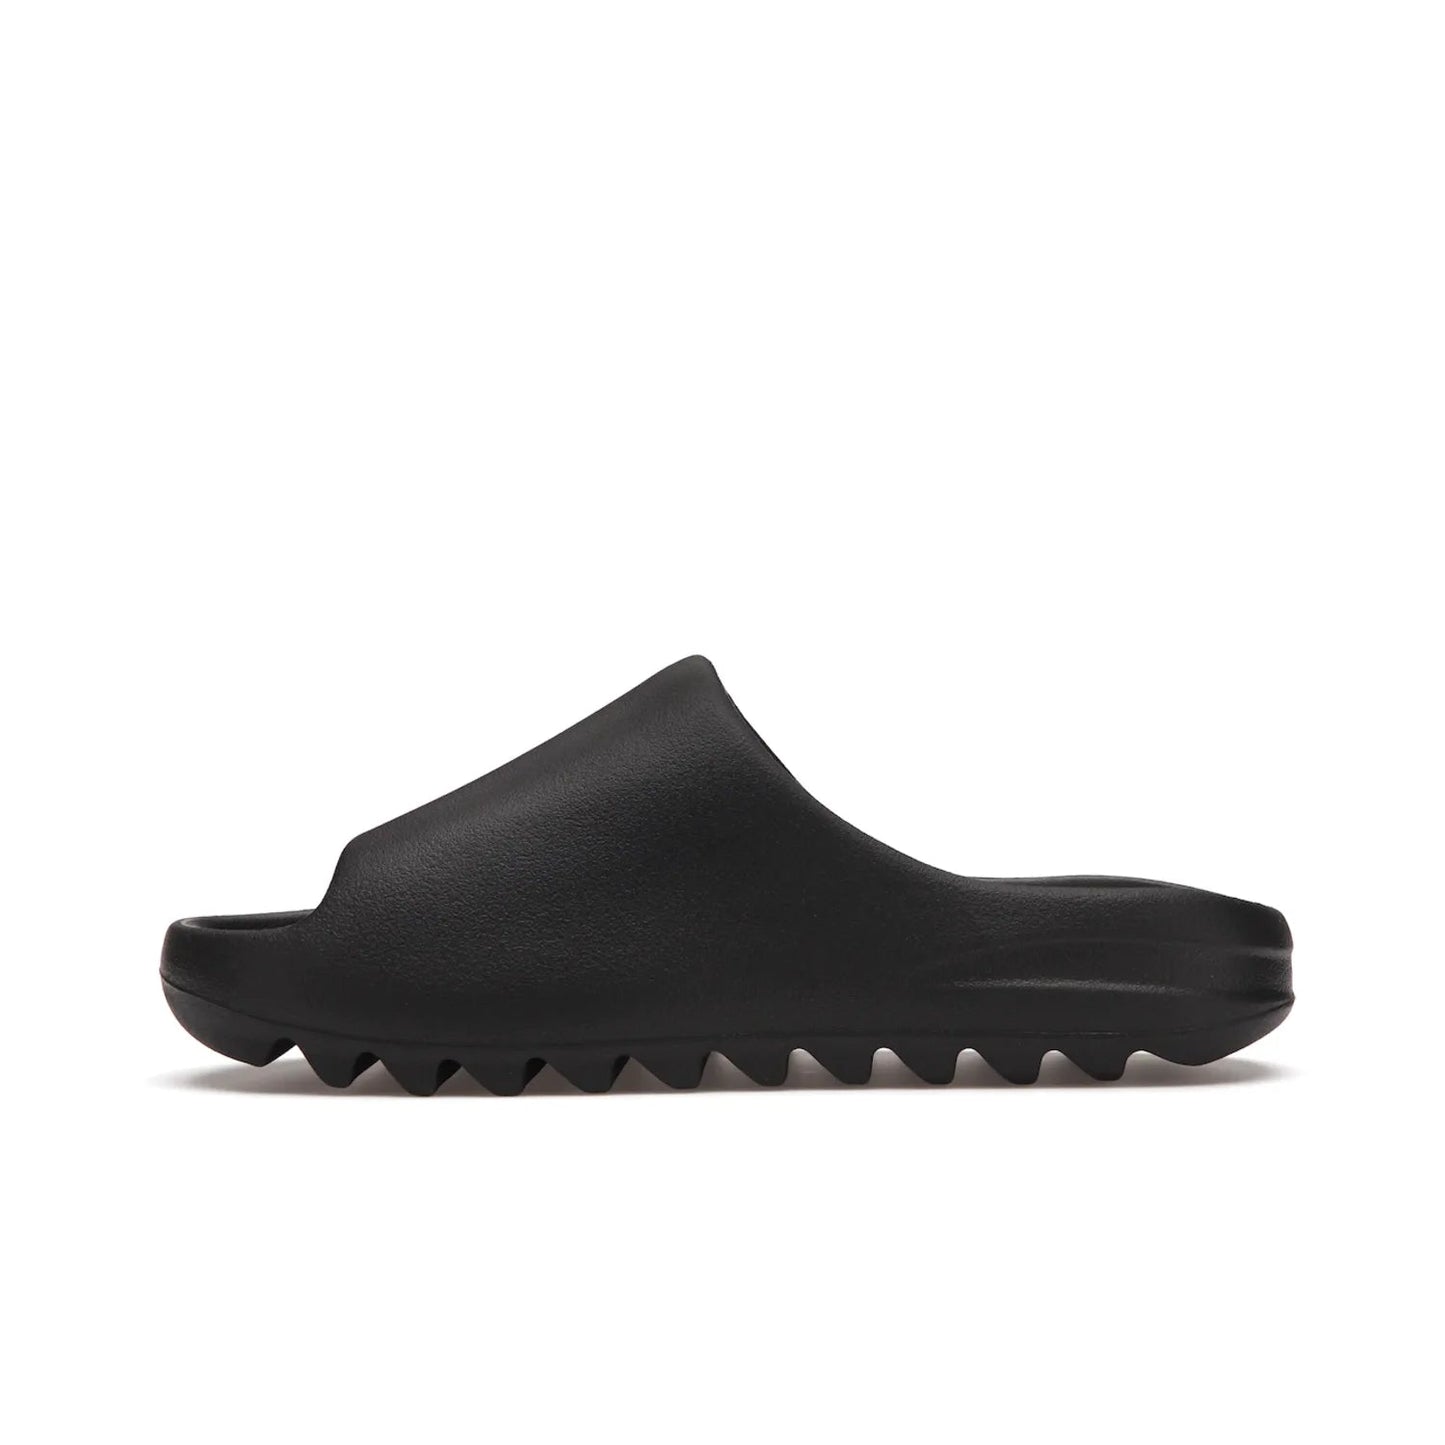 adidas Yeezy Slide Onyx - Image 19 - Only at www.BallersClubKickz.com - Step into comfort and style with the adidas Yeezy Slide Onyx. Featuring foam construction, an all-black colorway and a grooved outsole for stability and responsiveness, this versatile slide is a must-have for your collection.